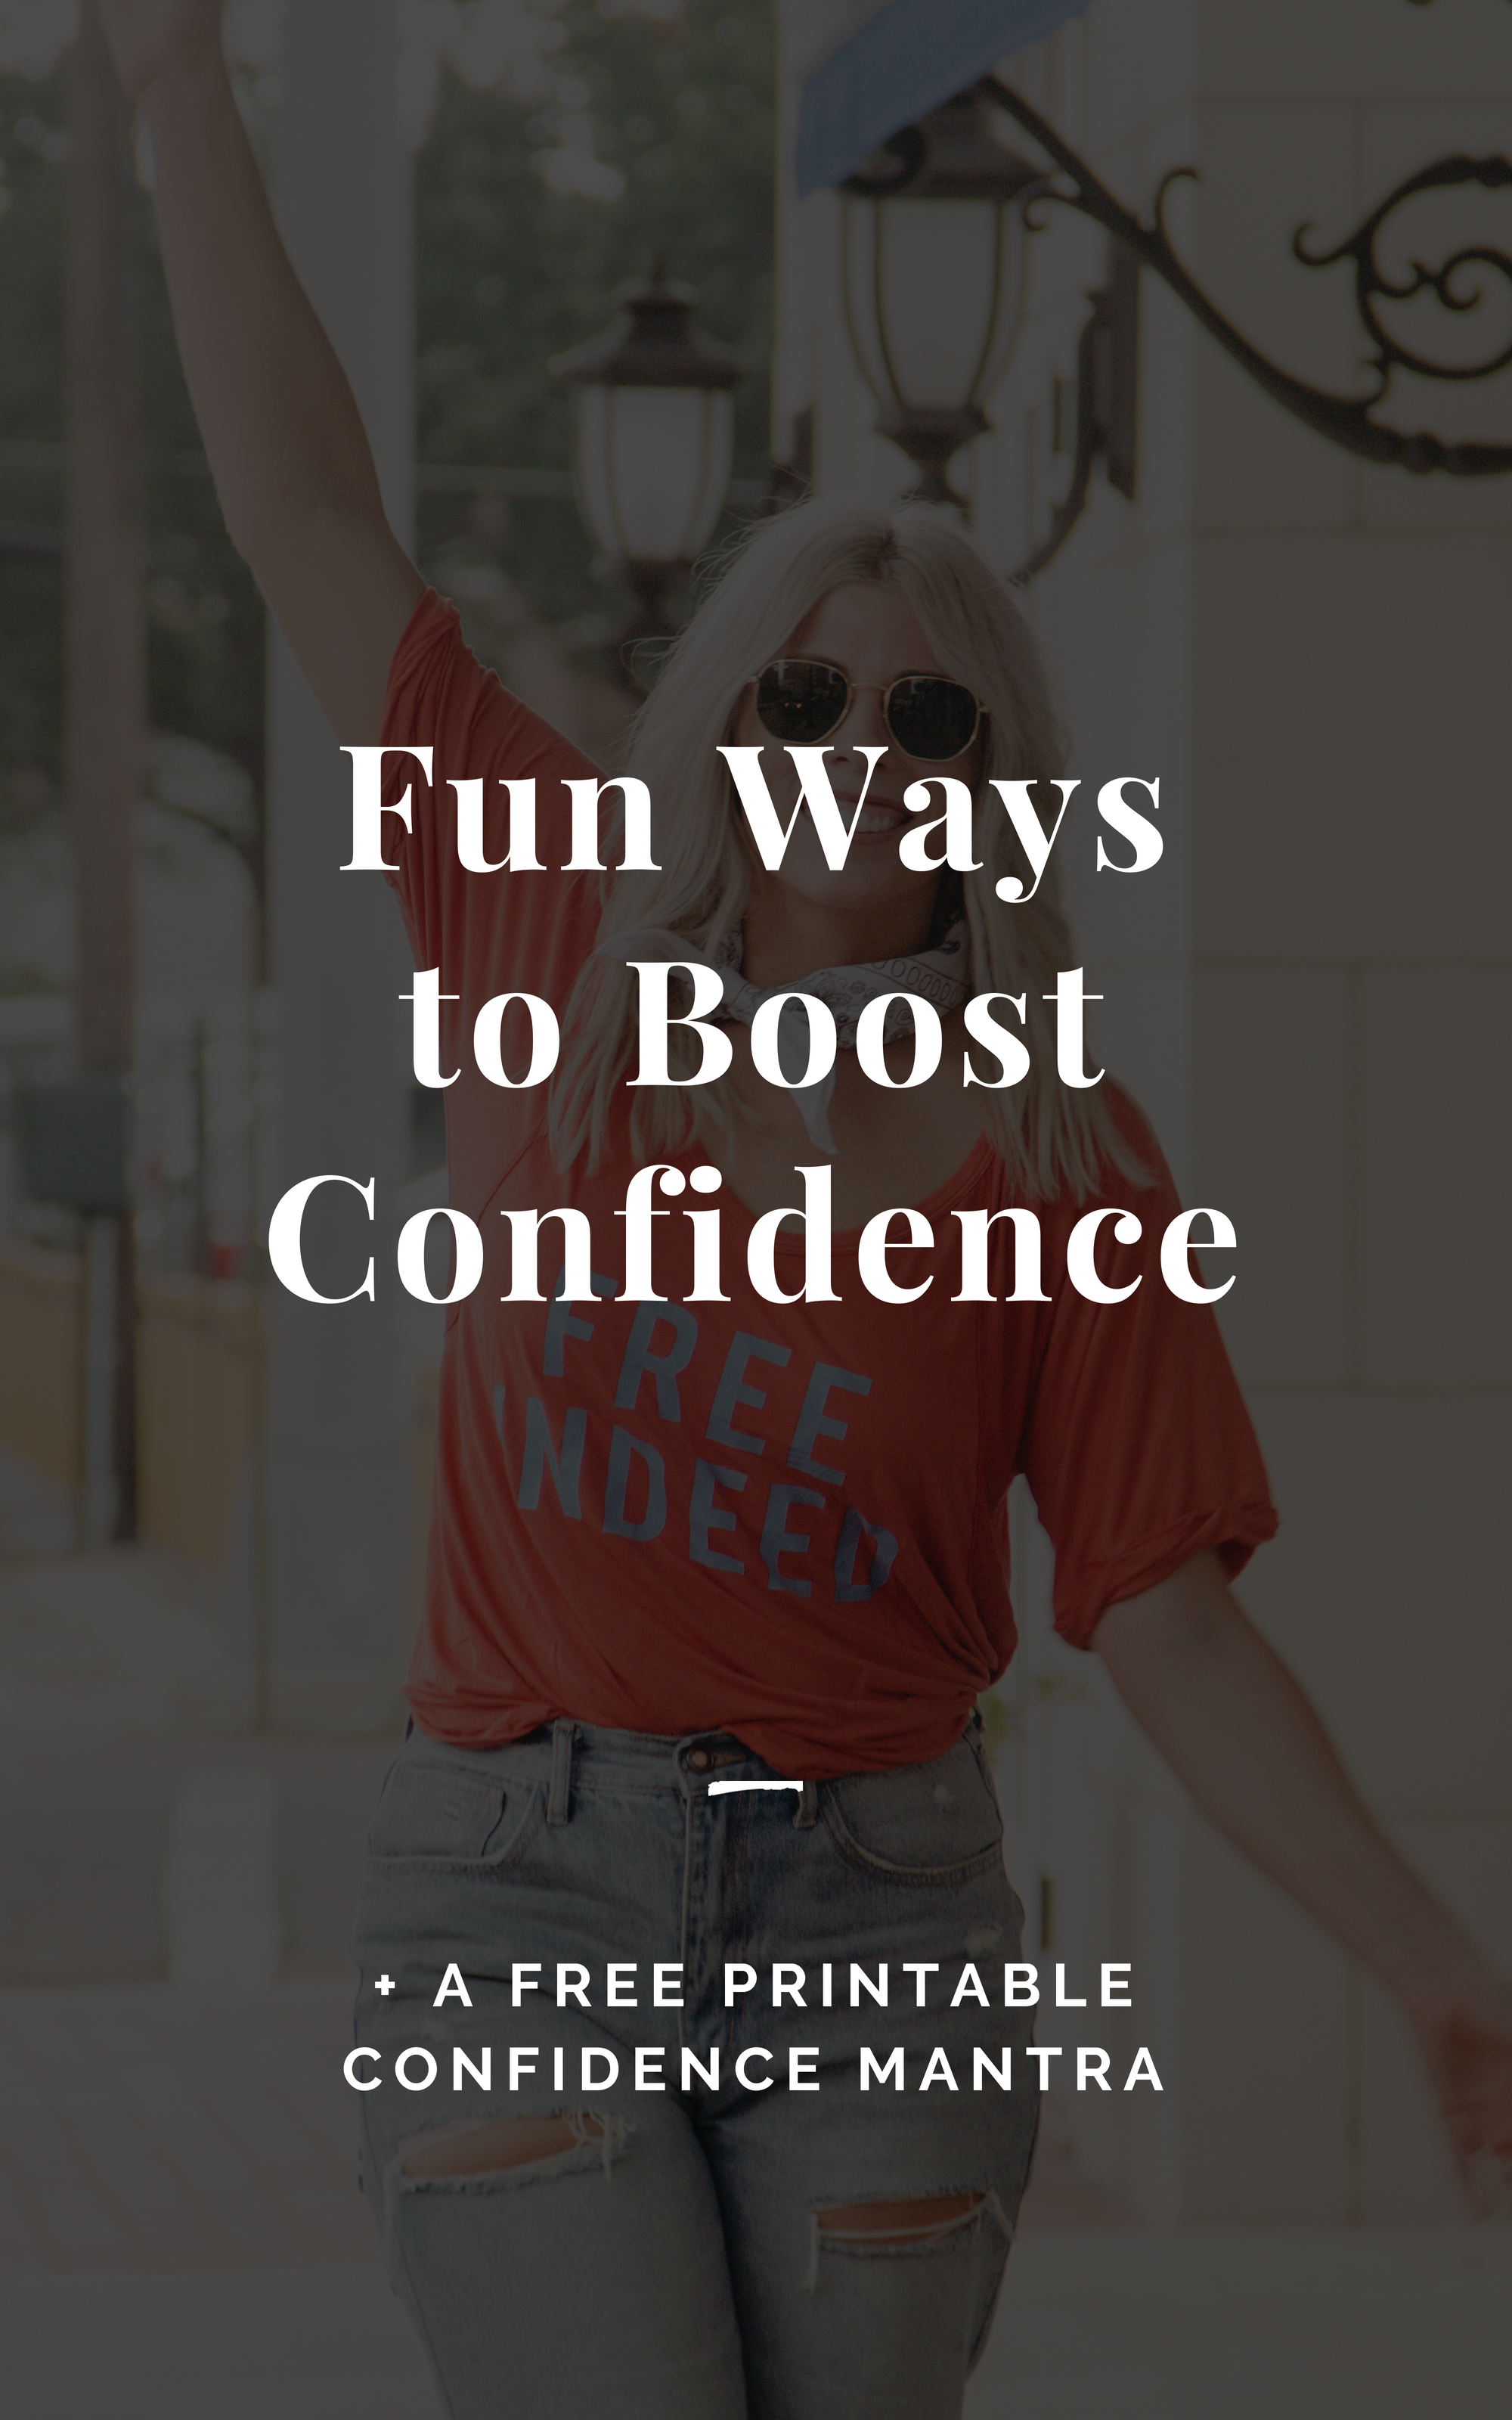 Fun Ways to Boost Confidence